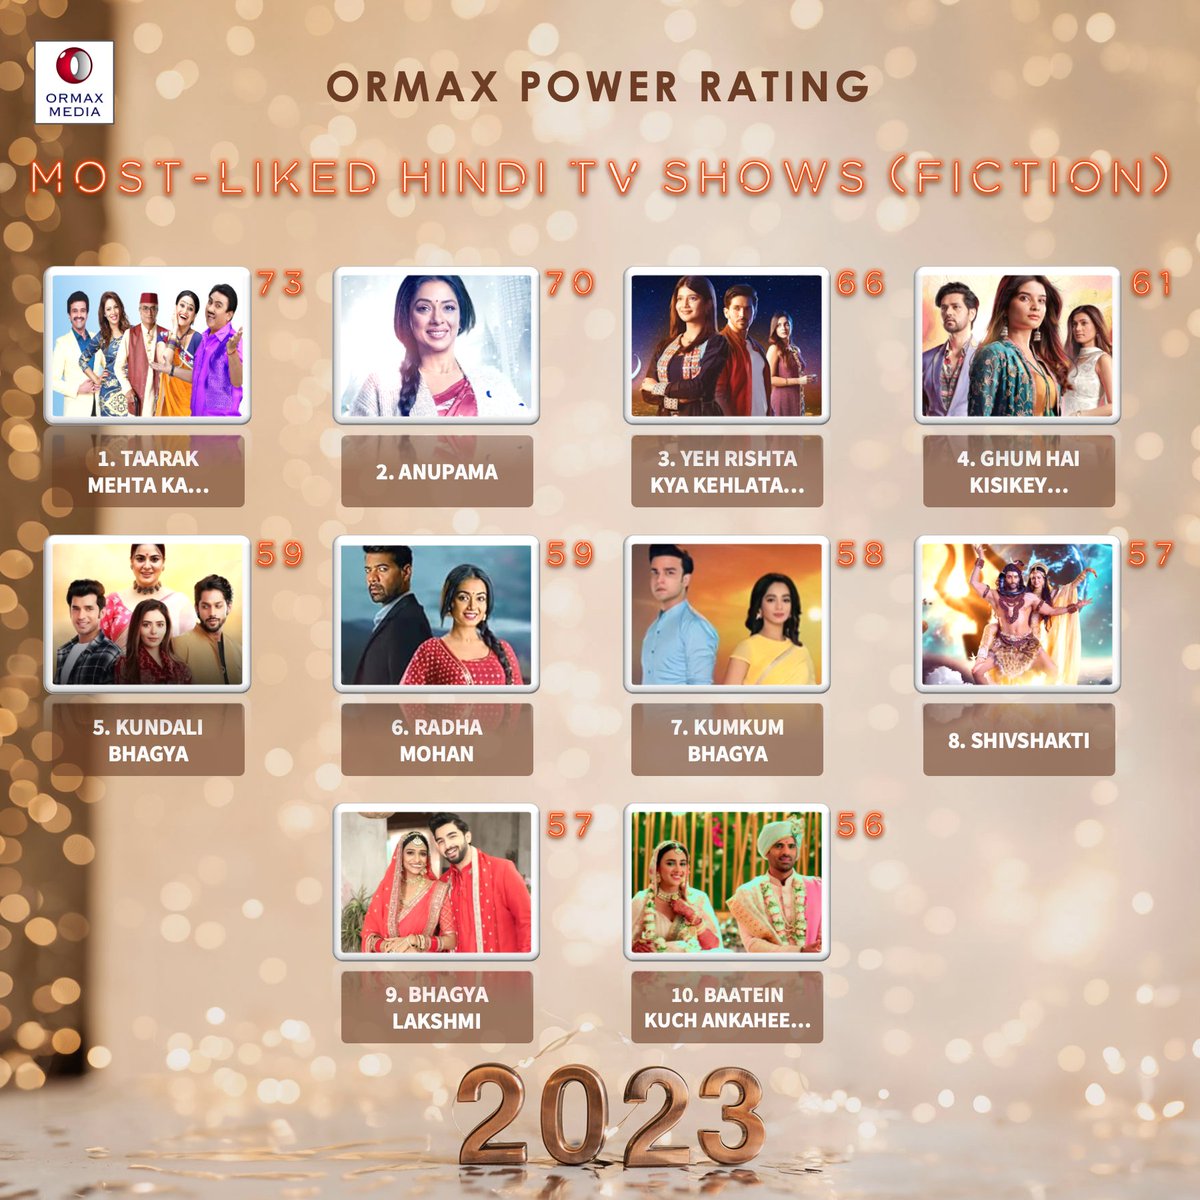 Top 10 most-liked Hindi TV Fiction shows of 2023, based on audience engagement #Ormax2023 #OrmaxPowerRating